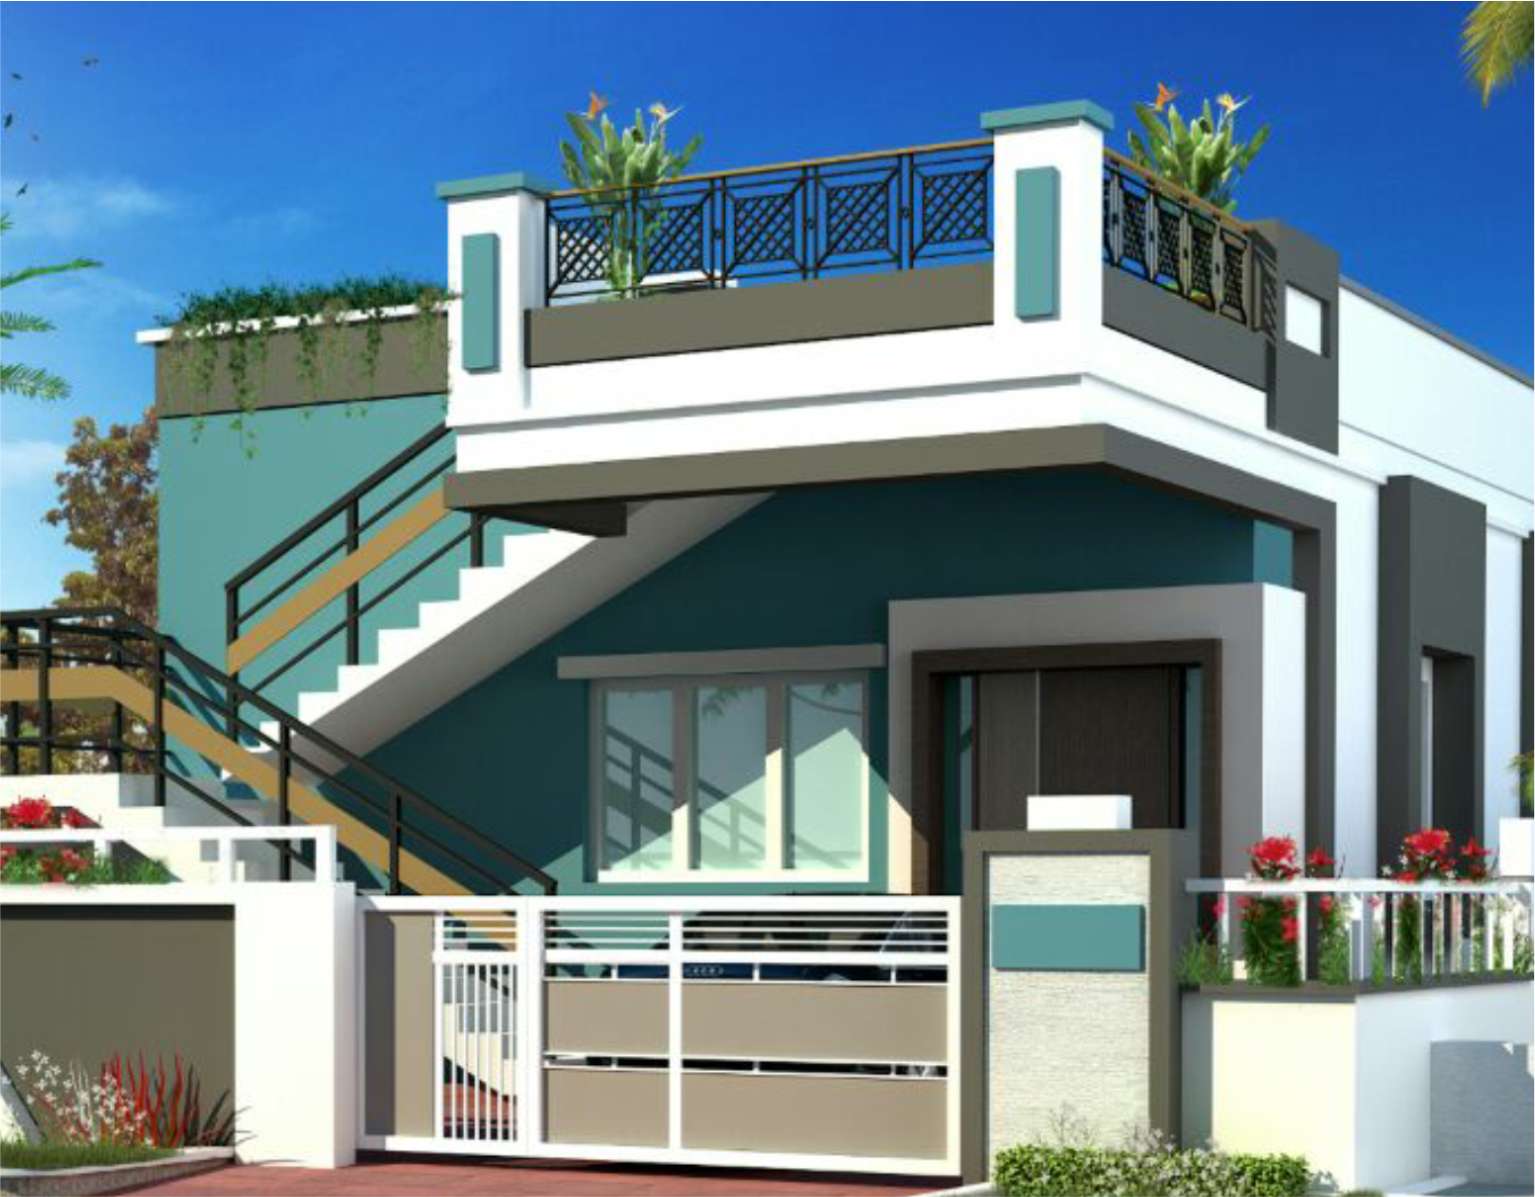 Real Value Land Promoters and Builders - Builders in Coimbatore, Best builders in Coimbatore, Top builders in Coimbatore, Coimbatore builders, famous builders in Coimbatore, promoters in Coimbatore, House builders in Coimbatore,House builders, New house builders in coimbatore, Homes builders in coimbatore,Homes builders, New homes builders in Coimbatore, Leading builders in Coimbatore, Home builders in Coimbatore, home builders, best home builder in Coimbatore, builder, coimbatore builders list, best builders Coimbatore,New house builders in coimbatore, reliable builders in Coimbatore, Real Value  builders,Real Value  homes builders, Real Value  builders in Coimbatore, Real Value  builders Coimbatore,Real Value  developers builders Coimbatore, residential builders in Coimbatore, fastest growing builders in Coimbatore, Best Constructors in Coimbatore, Best Promoters in Coimbatore, Best Construction Builders in Coimbatore, Contractors in Coimbatore, Property Developers In Coimbatore,Builders,Property in coimbatore,Developers in coimbatore, Real Value  developers in coimbatore, Residential Builder in Coimbatore, Residential Construction in Coimbatore,Residential in coimbatore,Construction, best builders in India, Best villas promoters in Coimbatore, Best villas promoters in Coimbatore, Best budget houses in Coimbatore, best construction companies in Coimbatore, builders in Coimbatore, Real Value , Real Value  Housing in Coimbatore, Best Construction in Coimbatore, Best Construction in Coimbatore, Flats in Coimbatore, Best individual Developers in Coimbatore, Best individual houses in Coimbatore, individual houses in Coimbatore, Best real estate in Coimbatore, best builders and constructions in Coimbatore, Coimbatore builders, Coimbatore builders, Coimbatore construction company, Developers in Coimbatore, Best Developers in Coimbatore, Best plots in Coimbatore, Best flats for sale in Coimbatore, properties in Coimbatore, property for sale in Coimbatore, Best luxury Developers in Coimbatore, independent house for sale in Coimbatore, residential plots in Coimbatore, Coimbatore house for rent